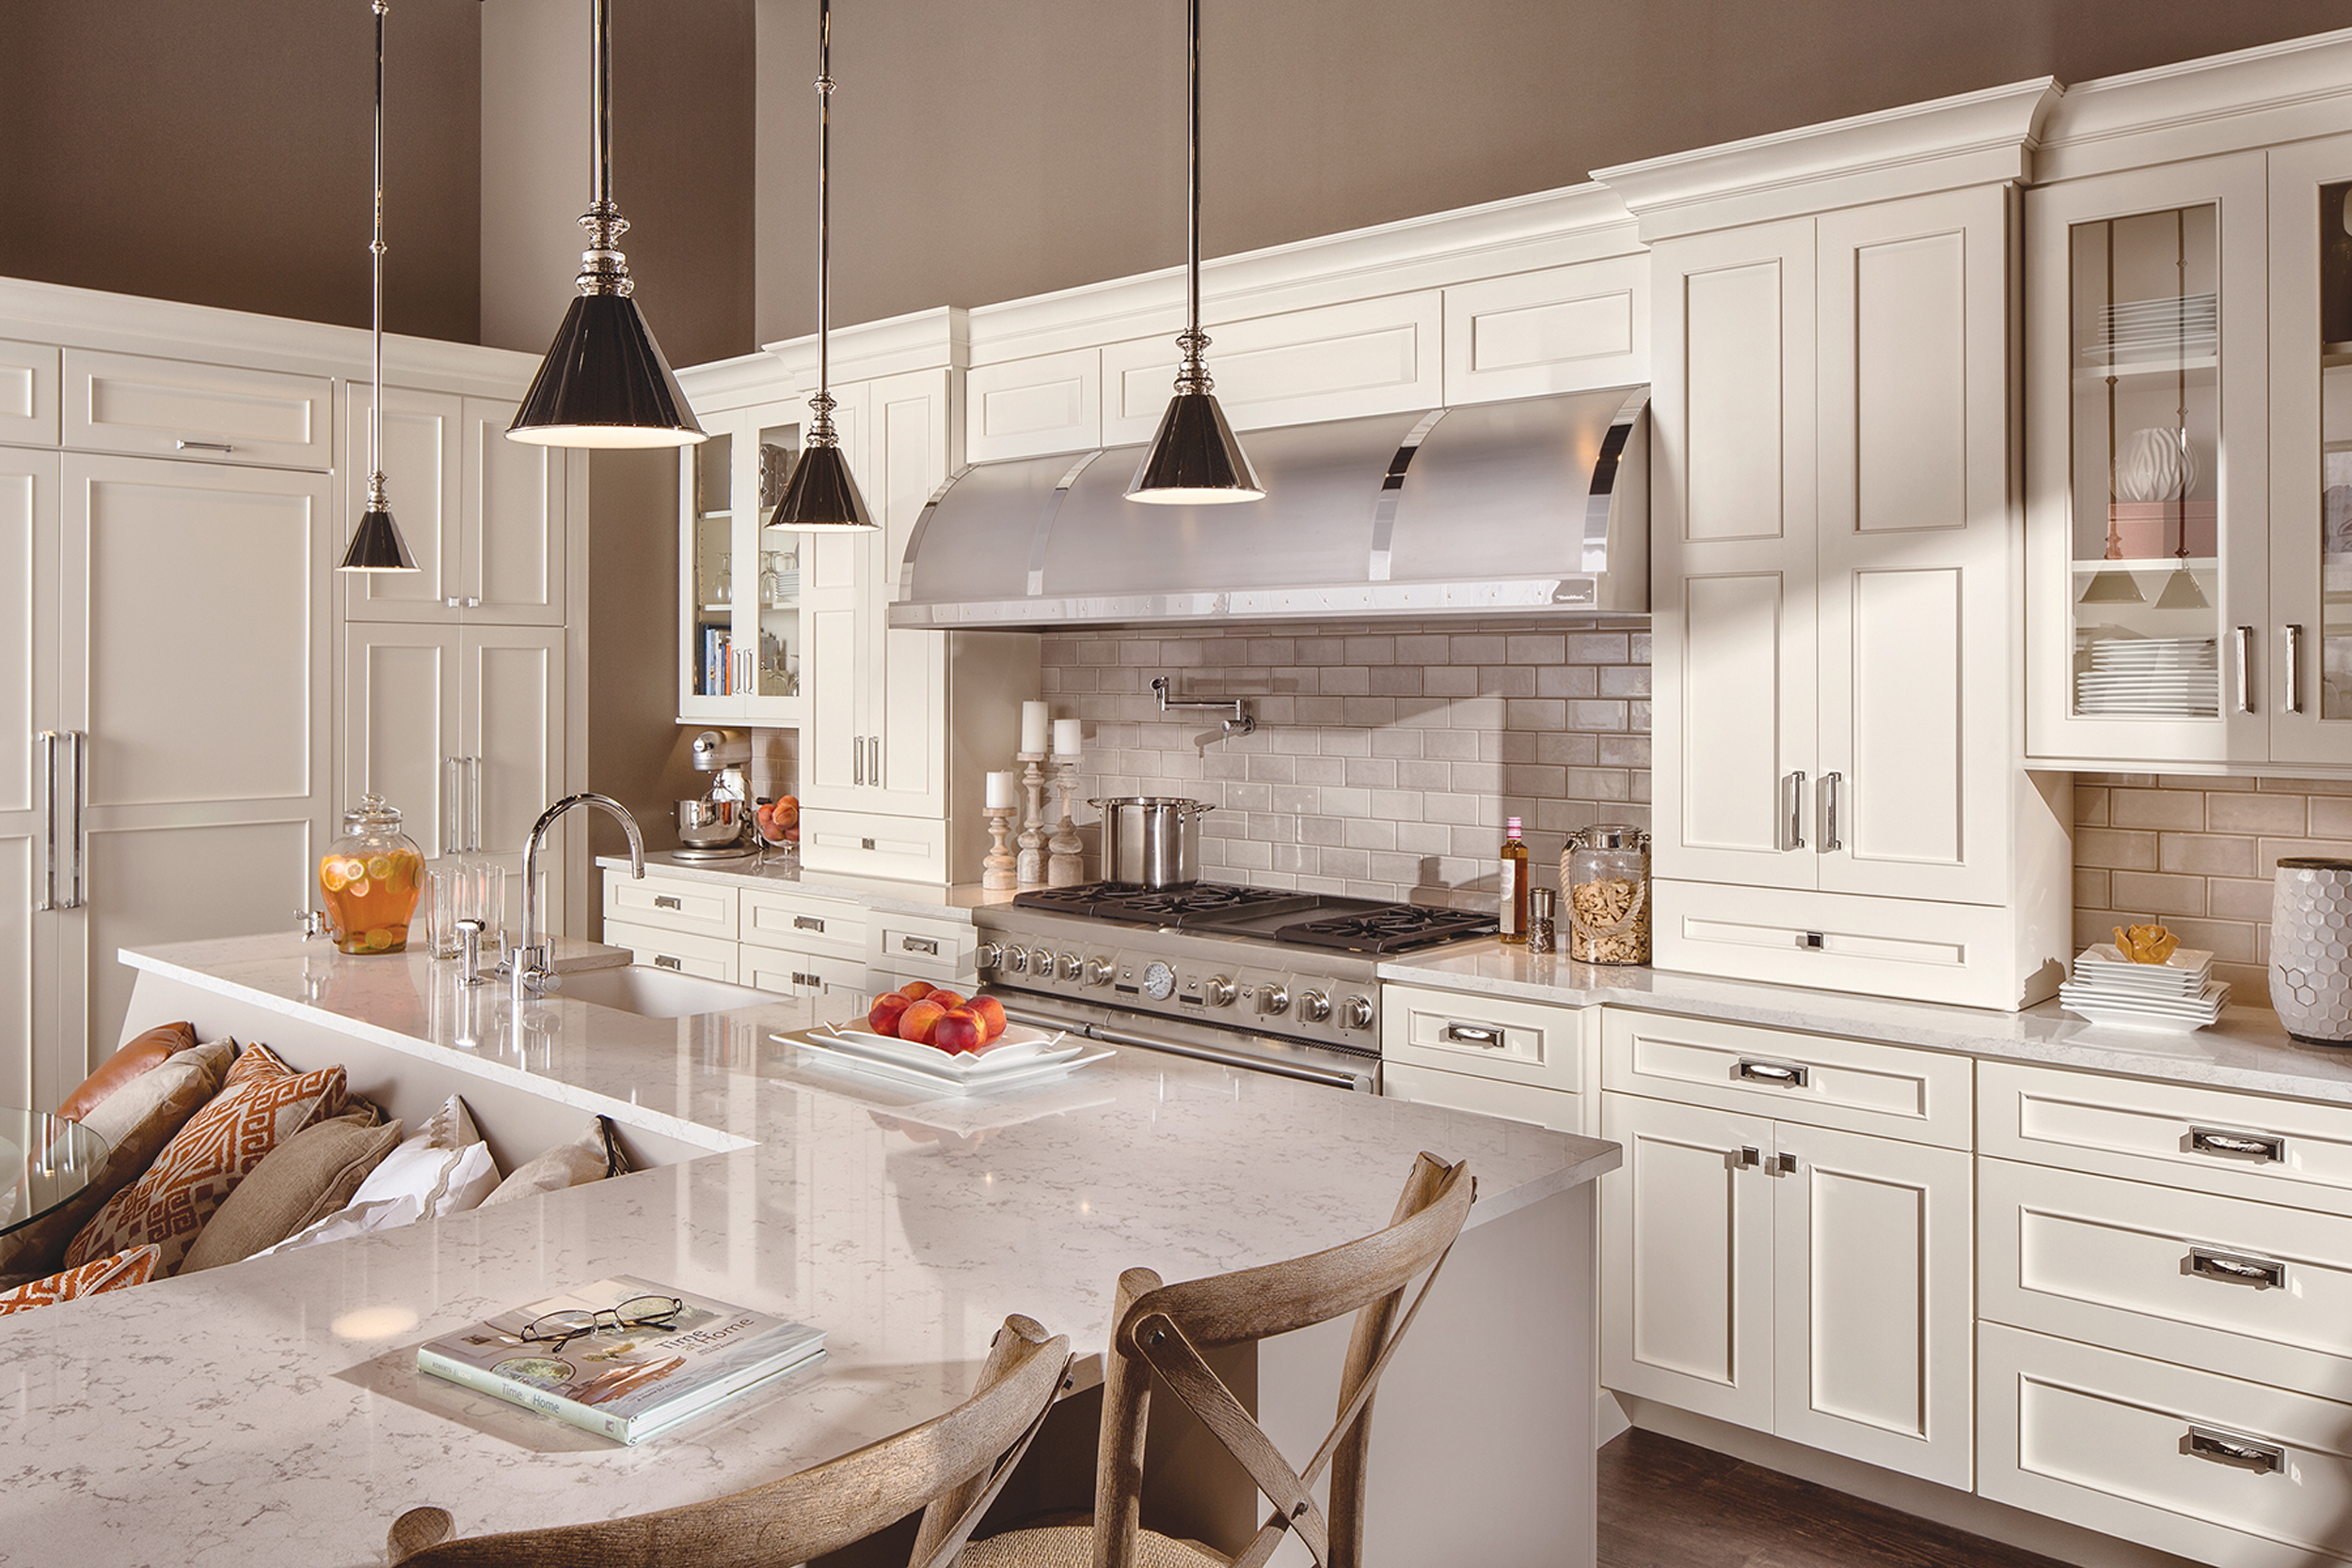 Crestwood Cabinetry By Dura Supreme